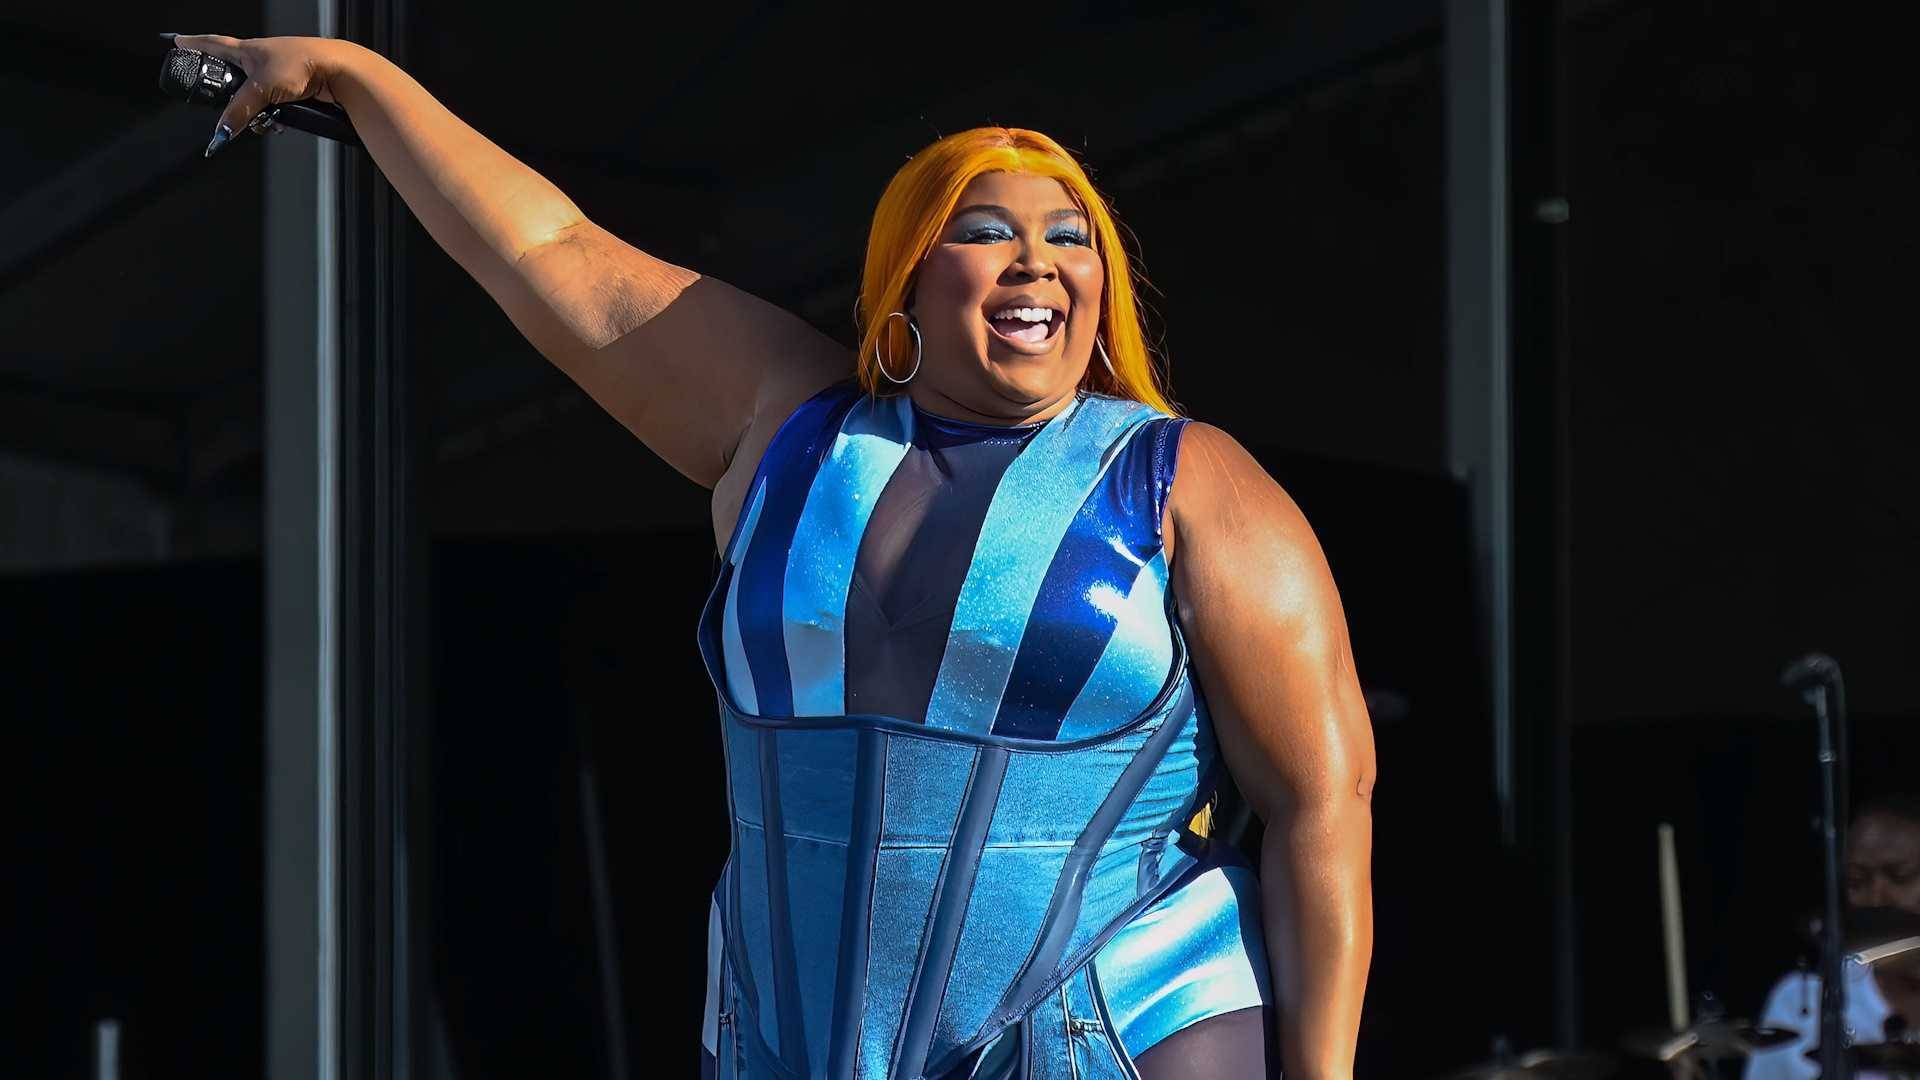 Lizzo performs 'About Damn Time' at the BET Awards - Indie88